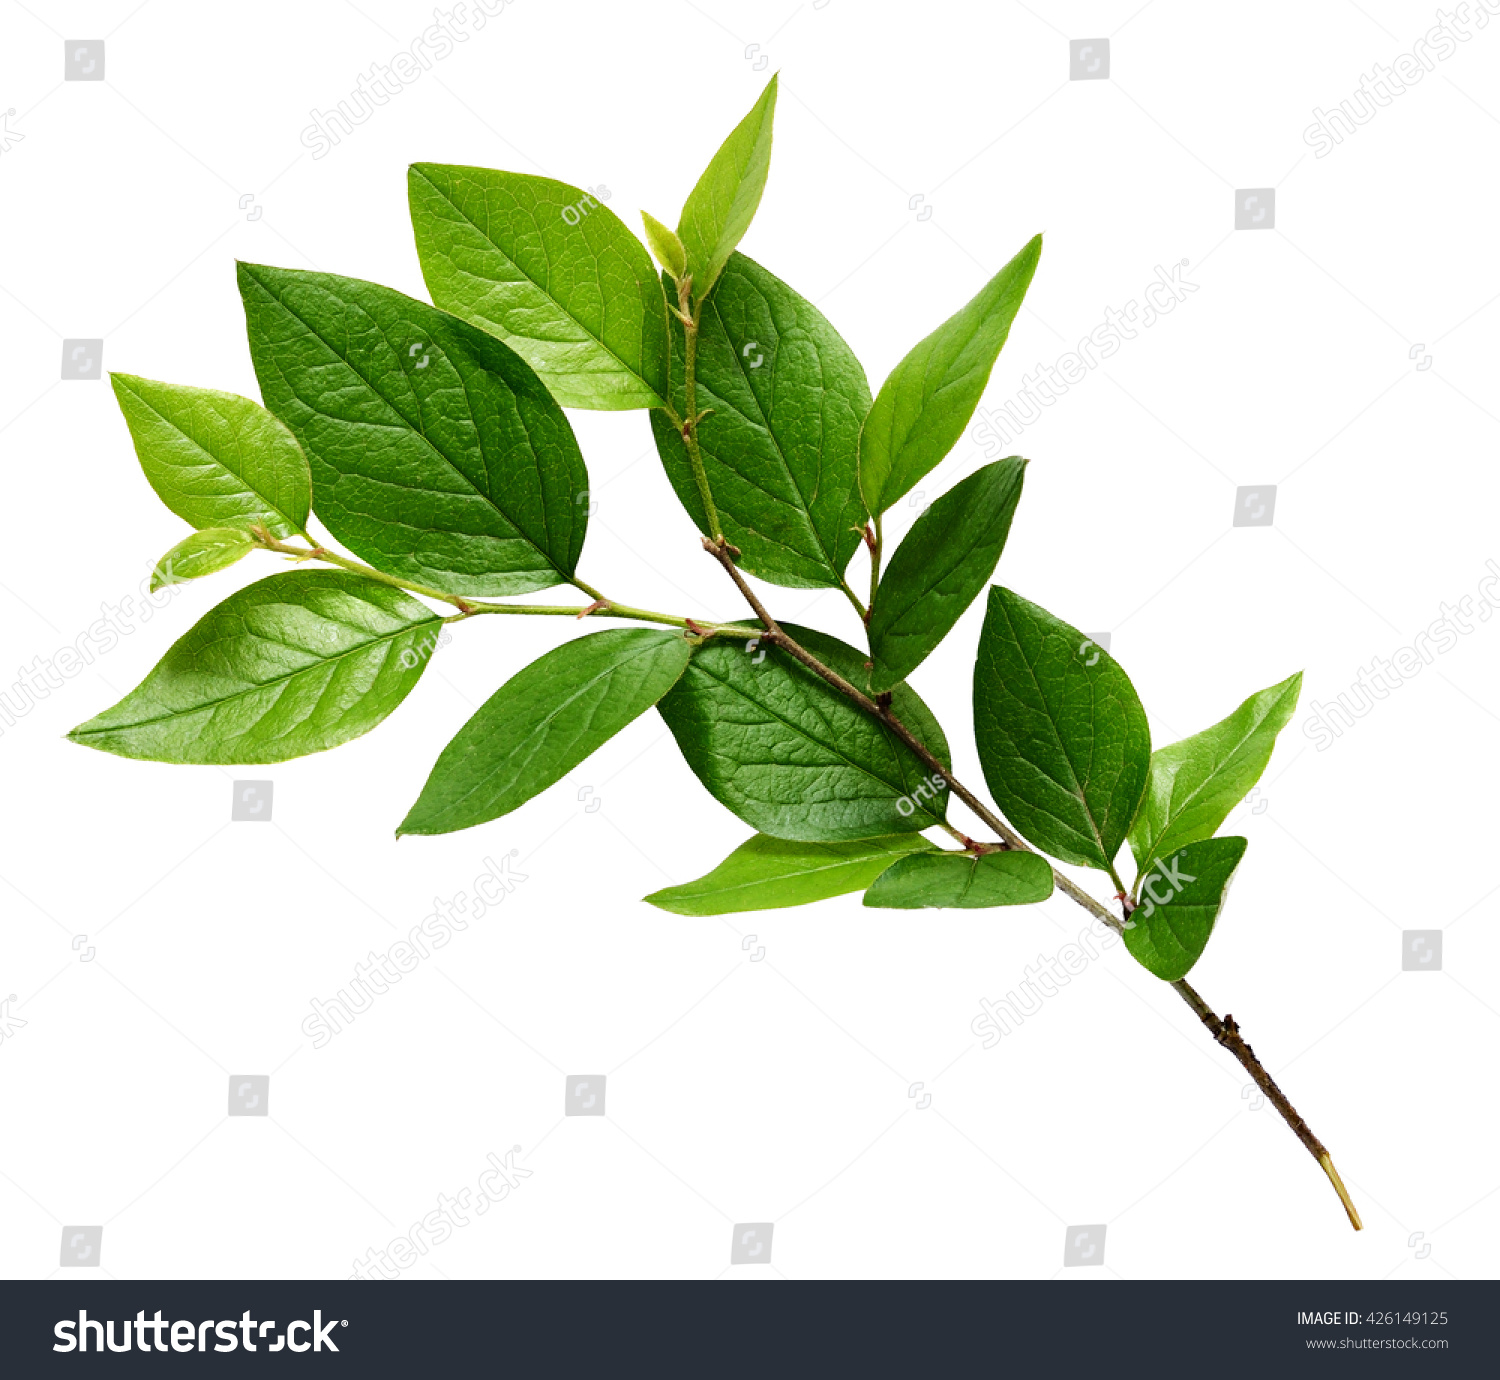 Twig with green leaves isolated on white #426149125